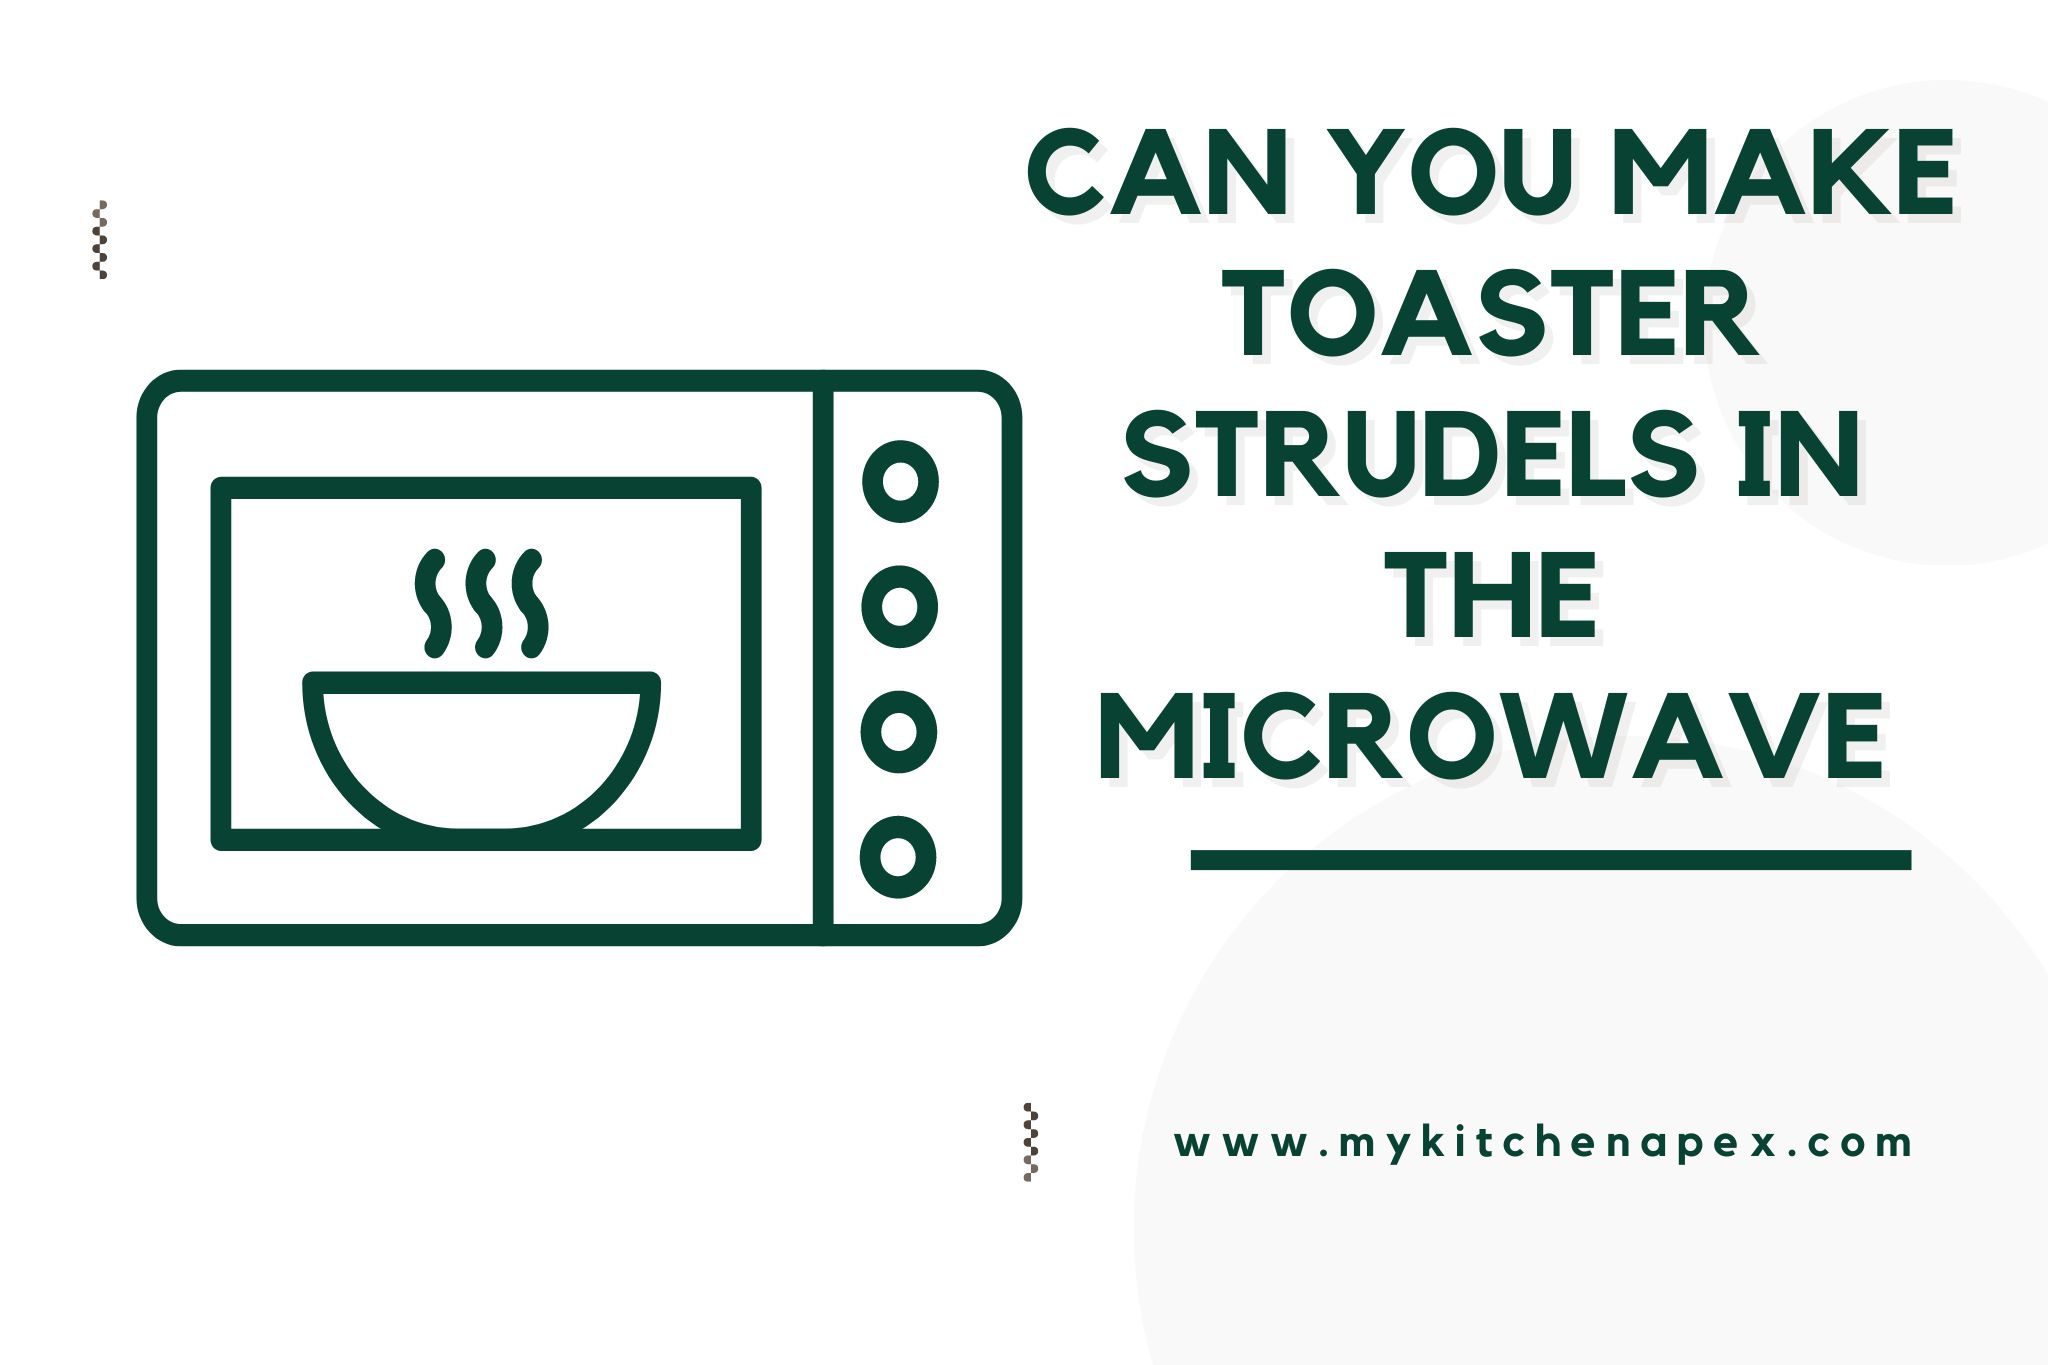 can you make toaster strudels in the microwave